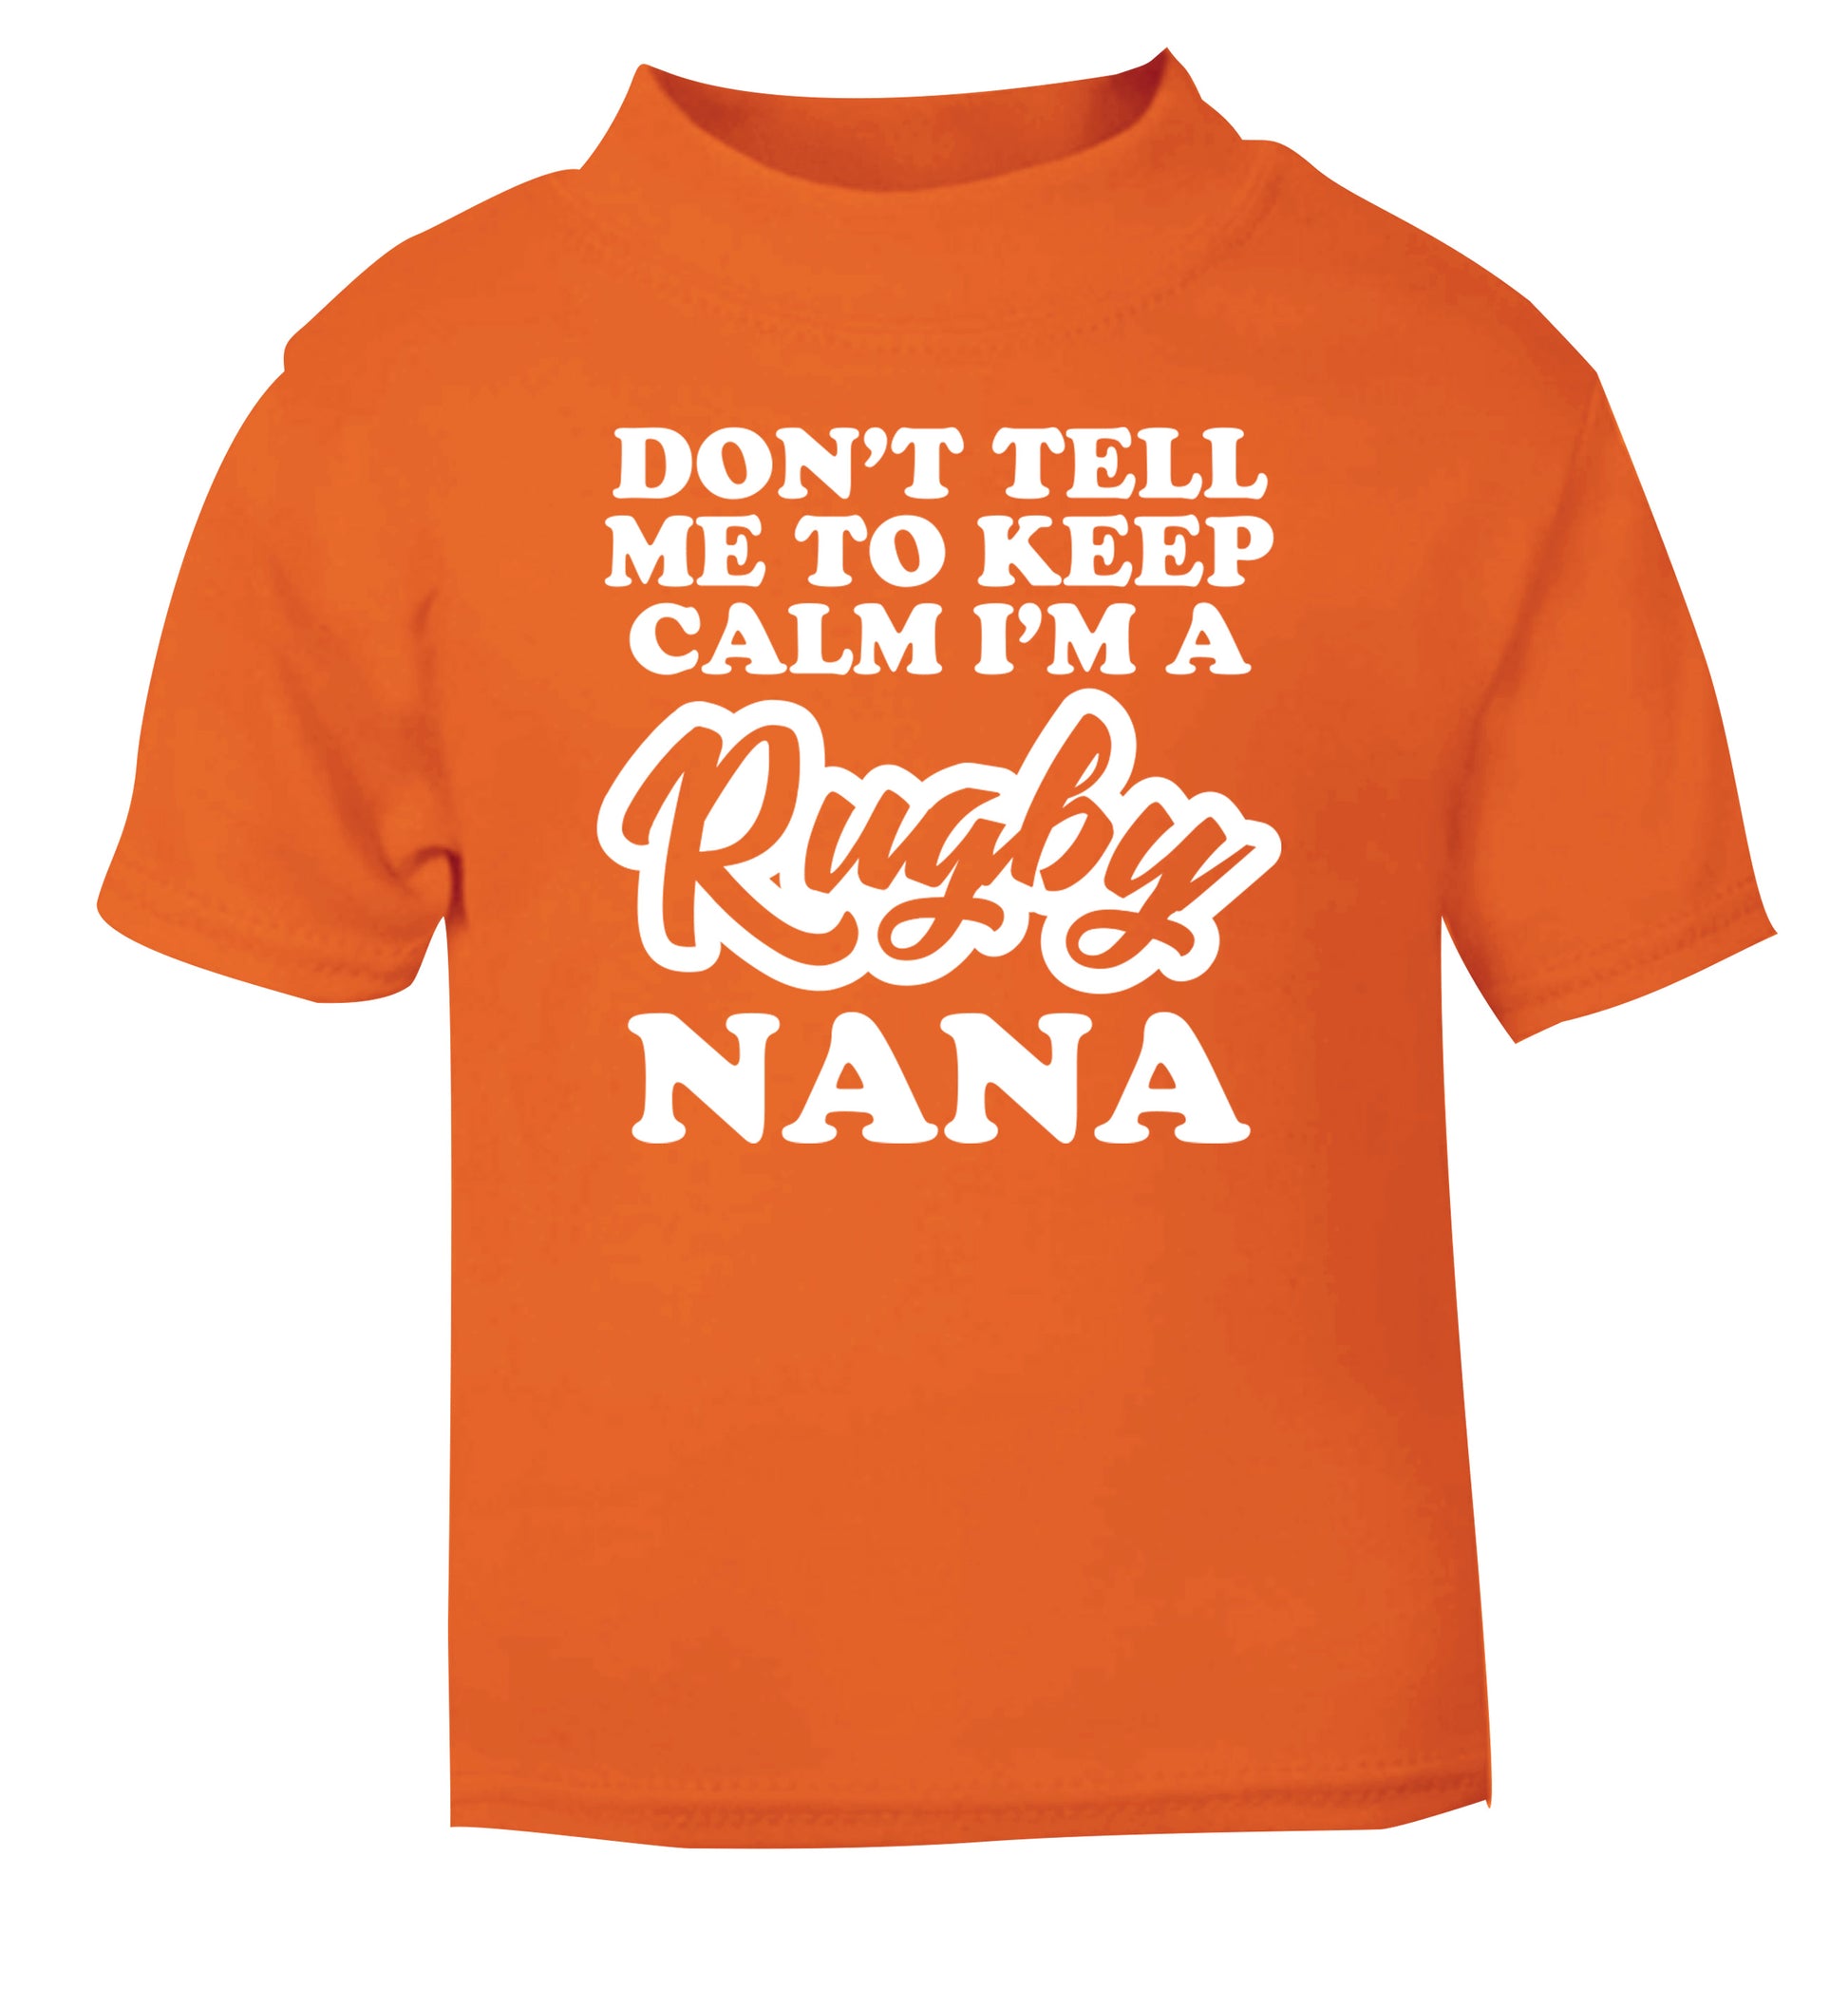 Don't tell me to keep calm I'm a rugby nana orange Baby Toddler Tshirt 2 Years